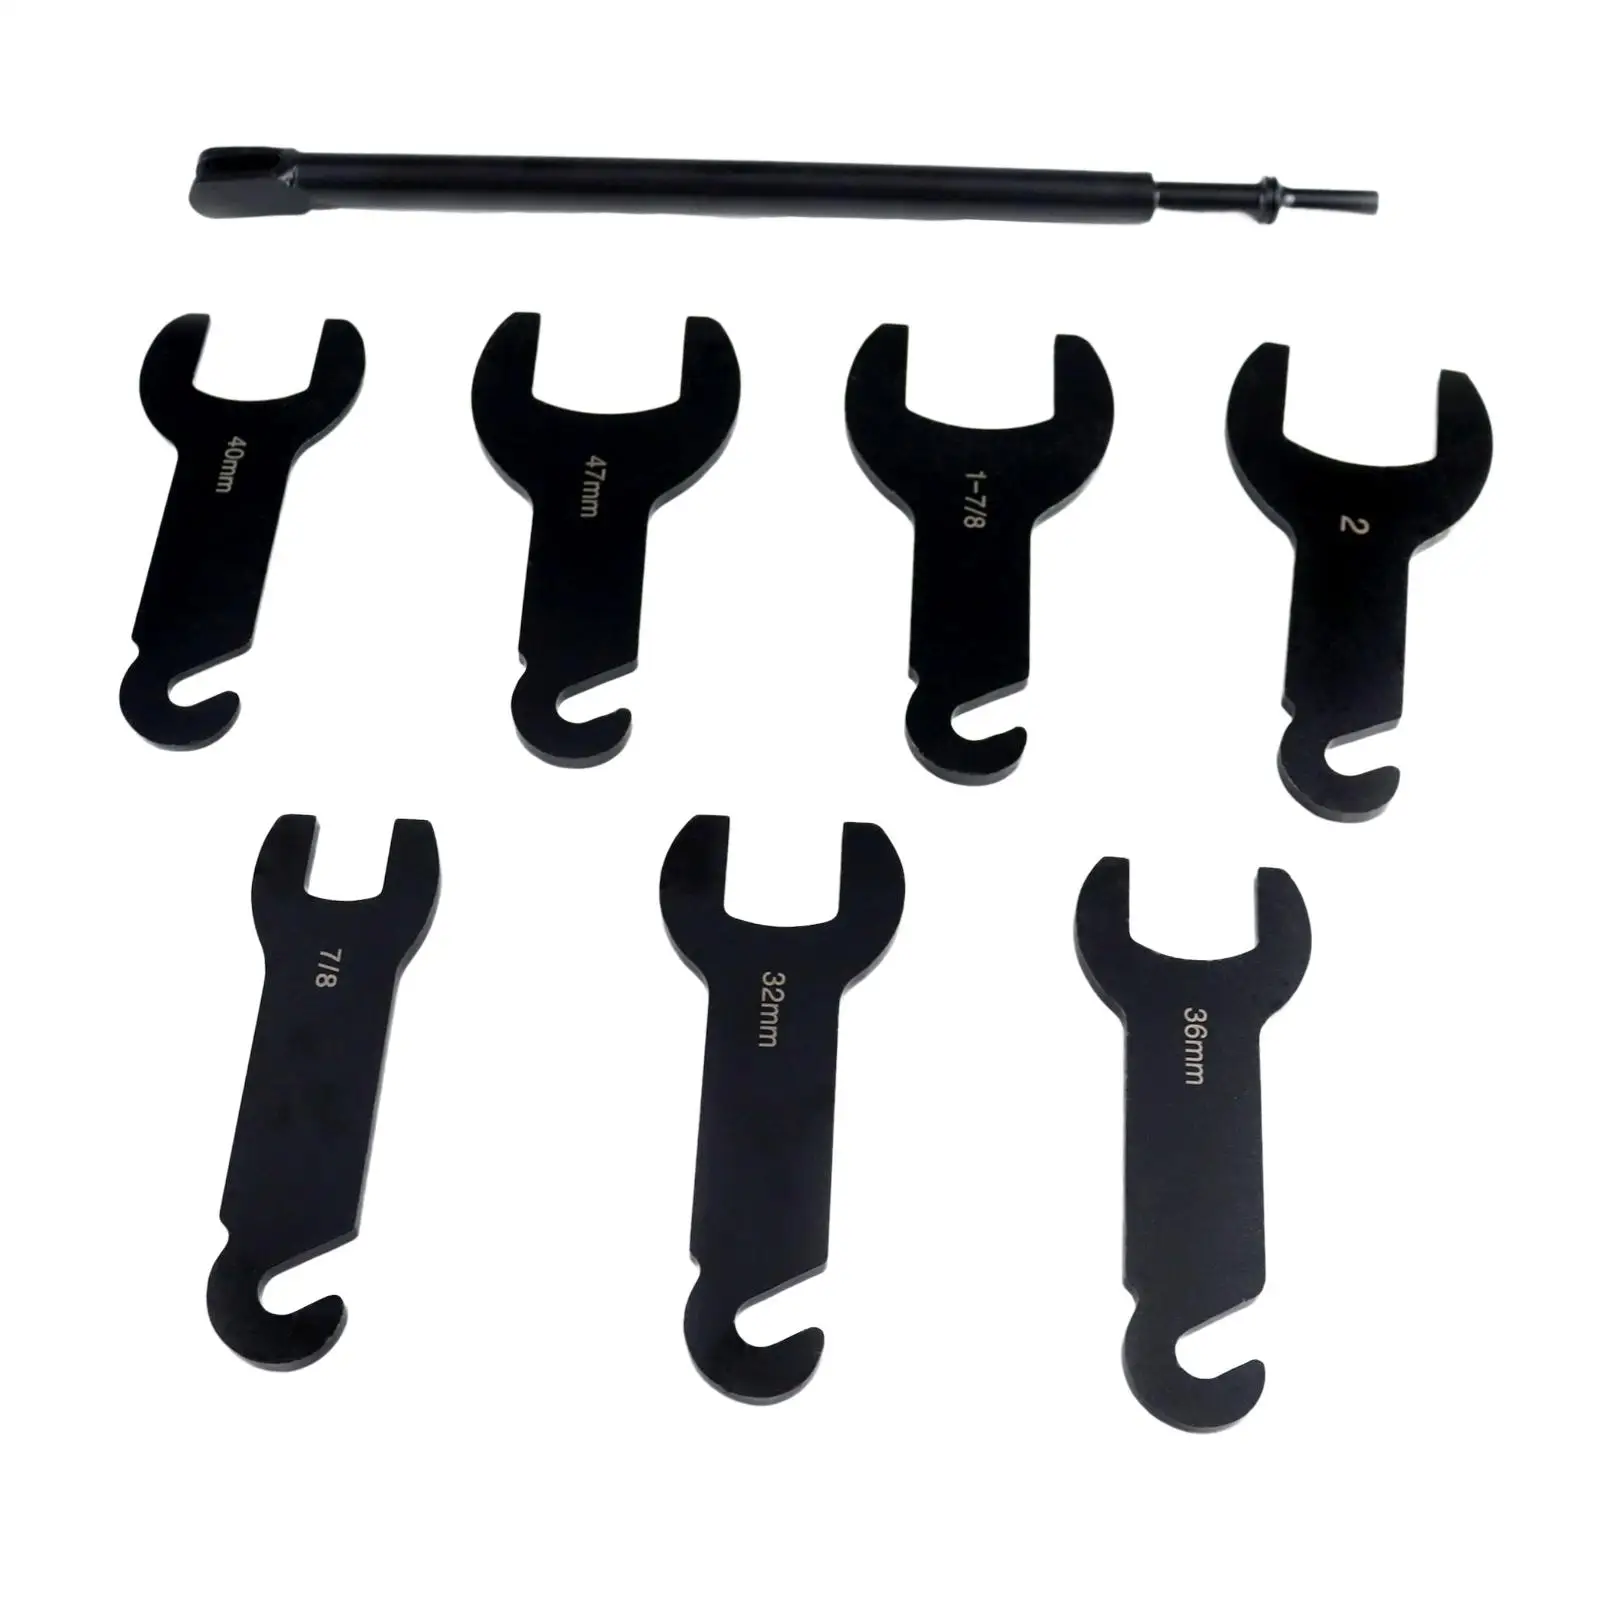 8Pcs Pneumatic Fan Clutch Wrench Set 43300 Car Disassembly Tool Easily Removes and Installs Solid for Jeep Cars Vehicles